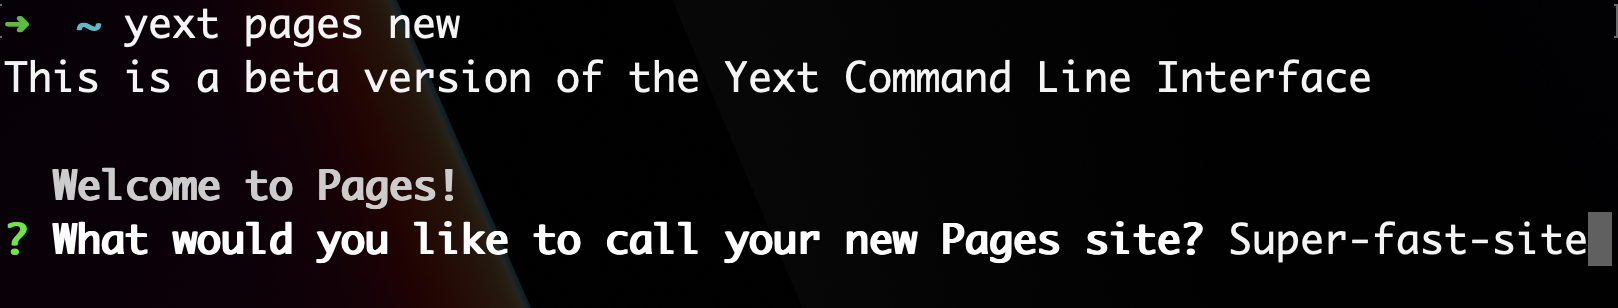 yext pages new command return response